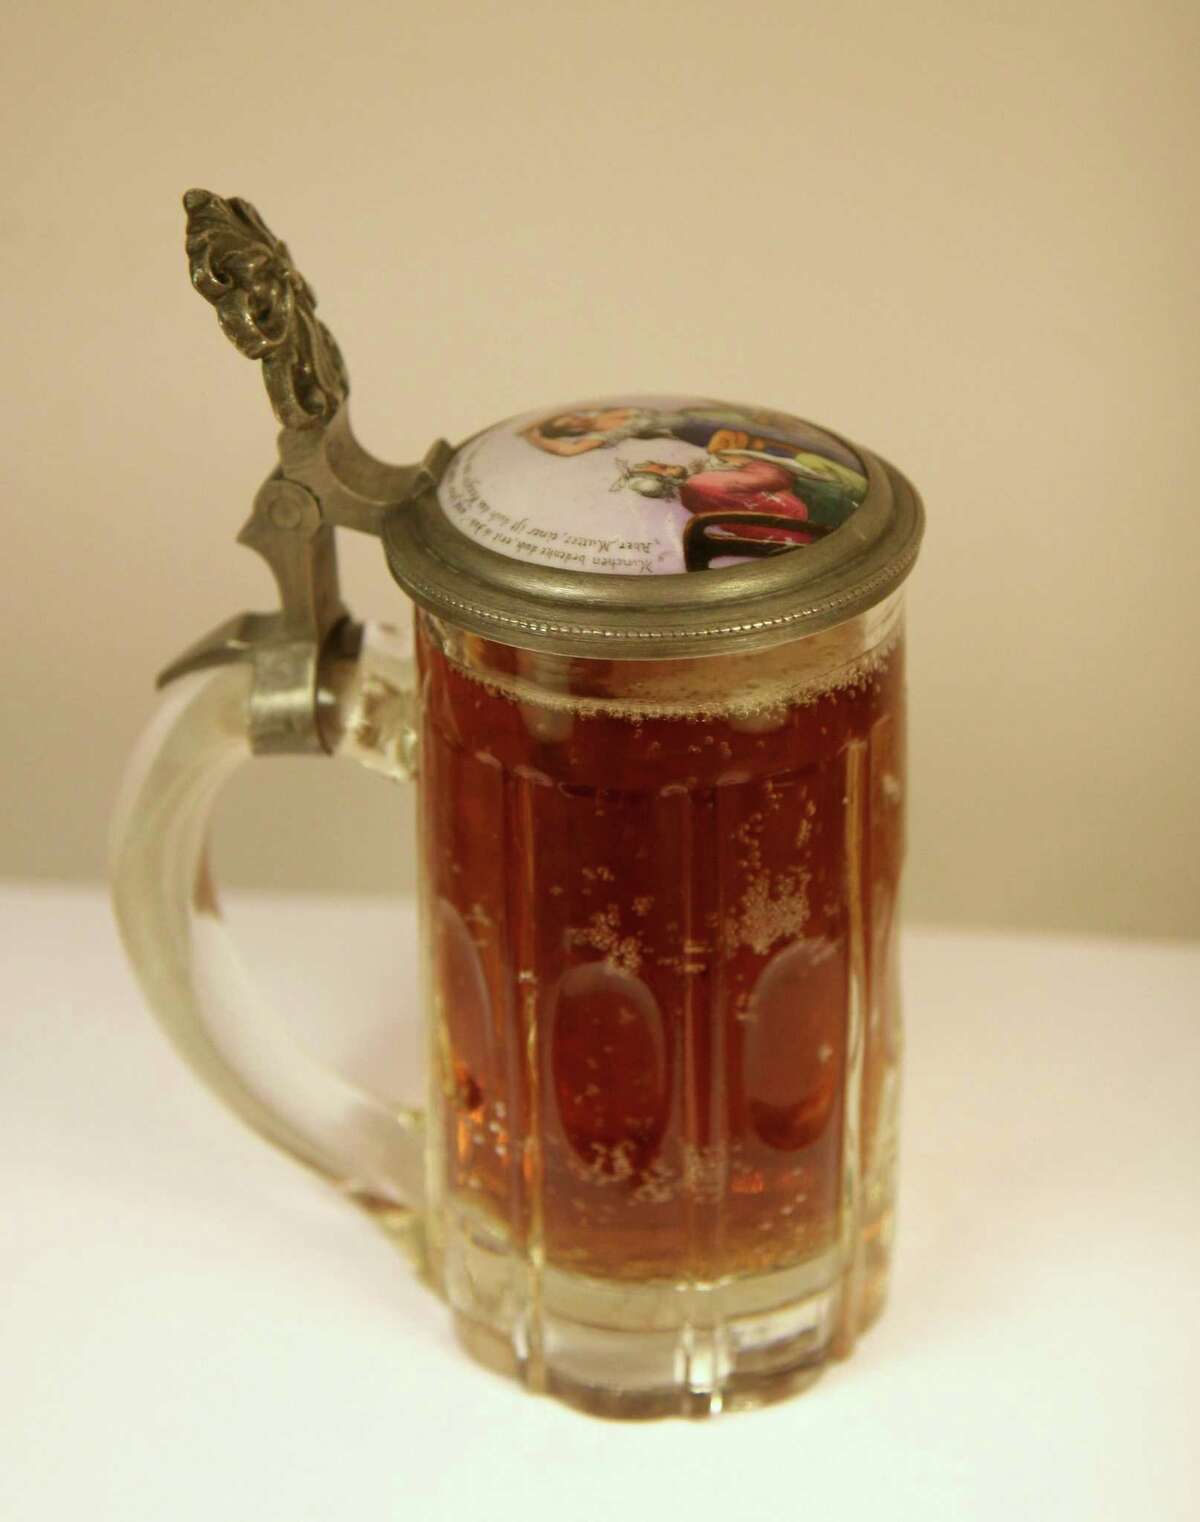 A glass stein with a painted ceramic lid. Lids on beer mugs were originally developed to keep insects from flying into the beer. Mugs largely have been displaced by shaker pints in many drinking establishments in the United States, but remain popular in German speaking areas of Europe.